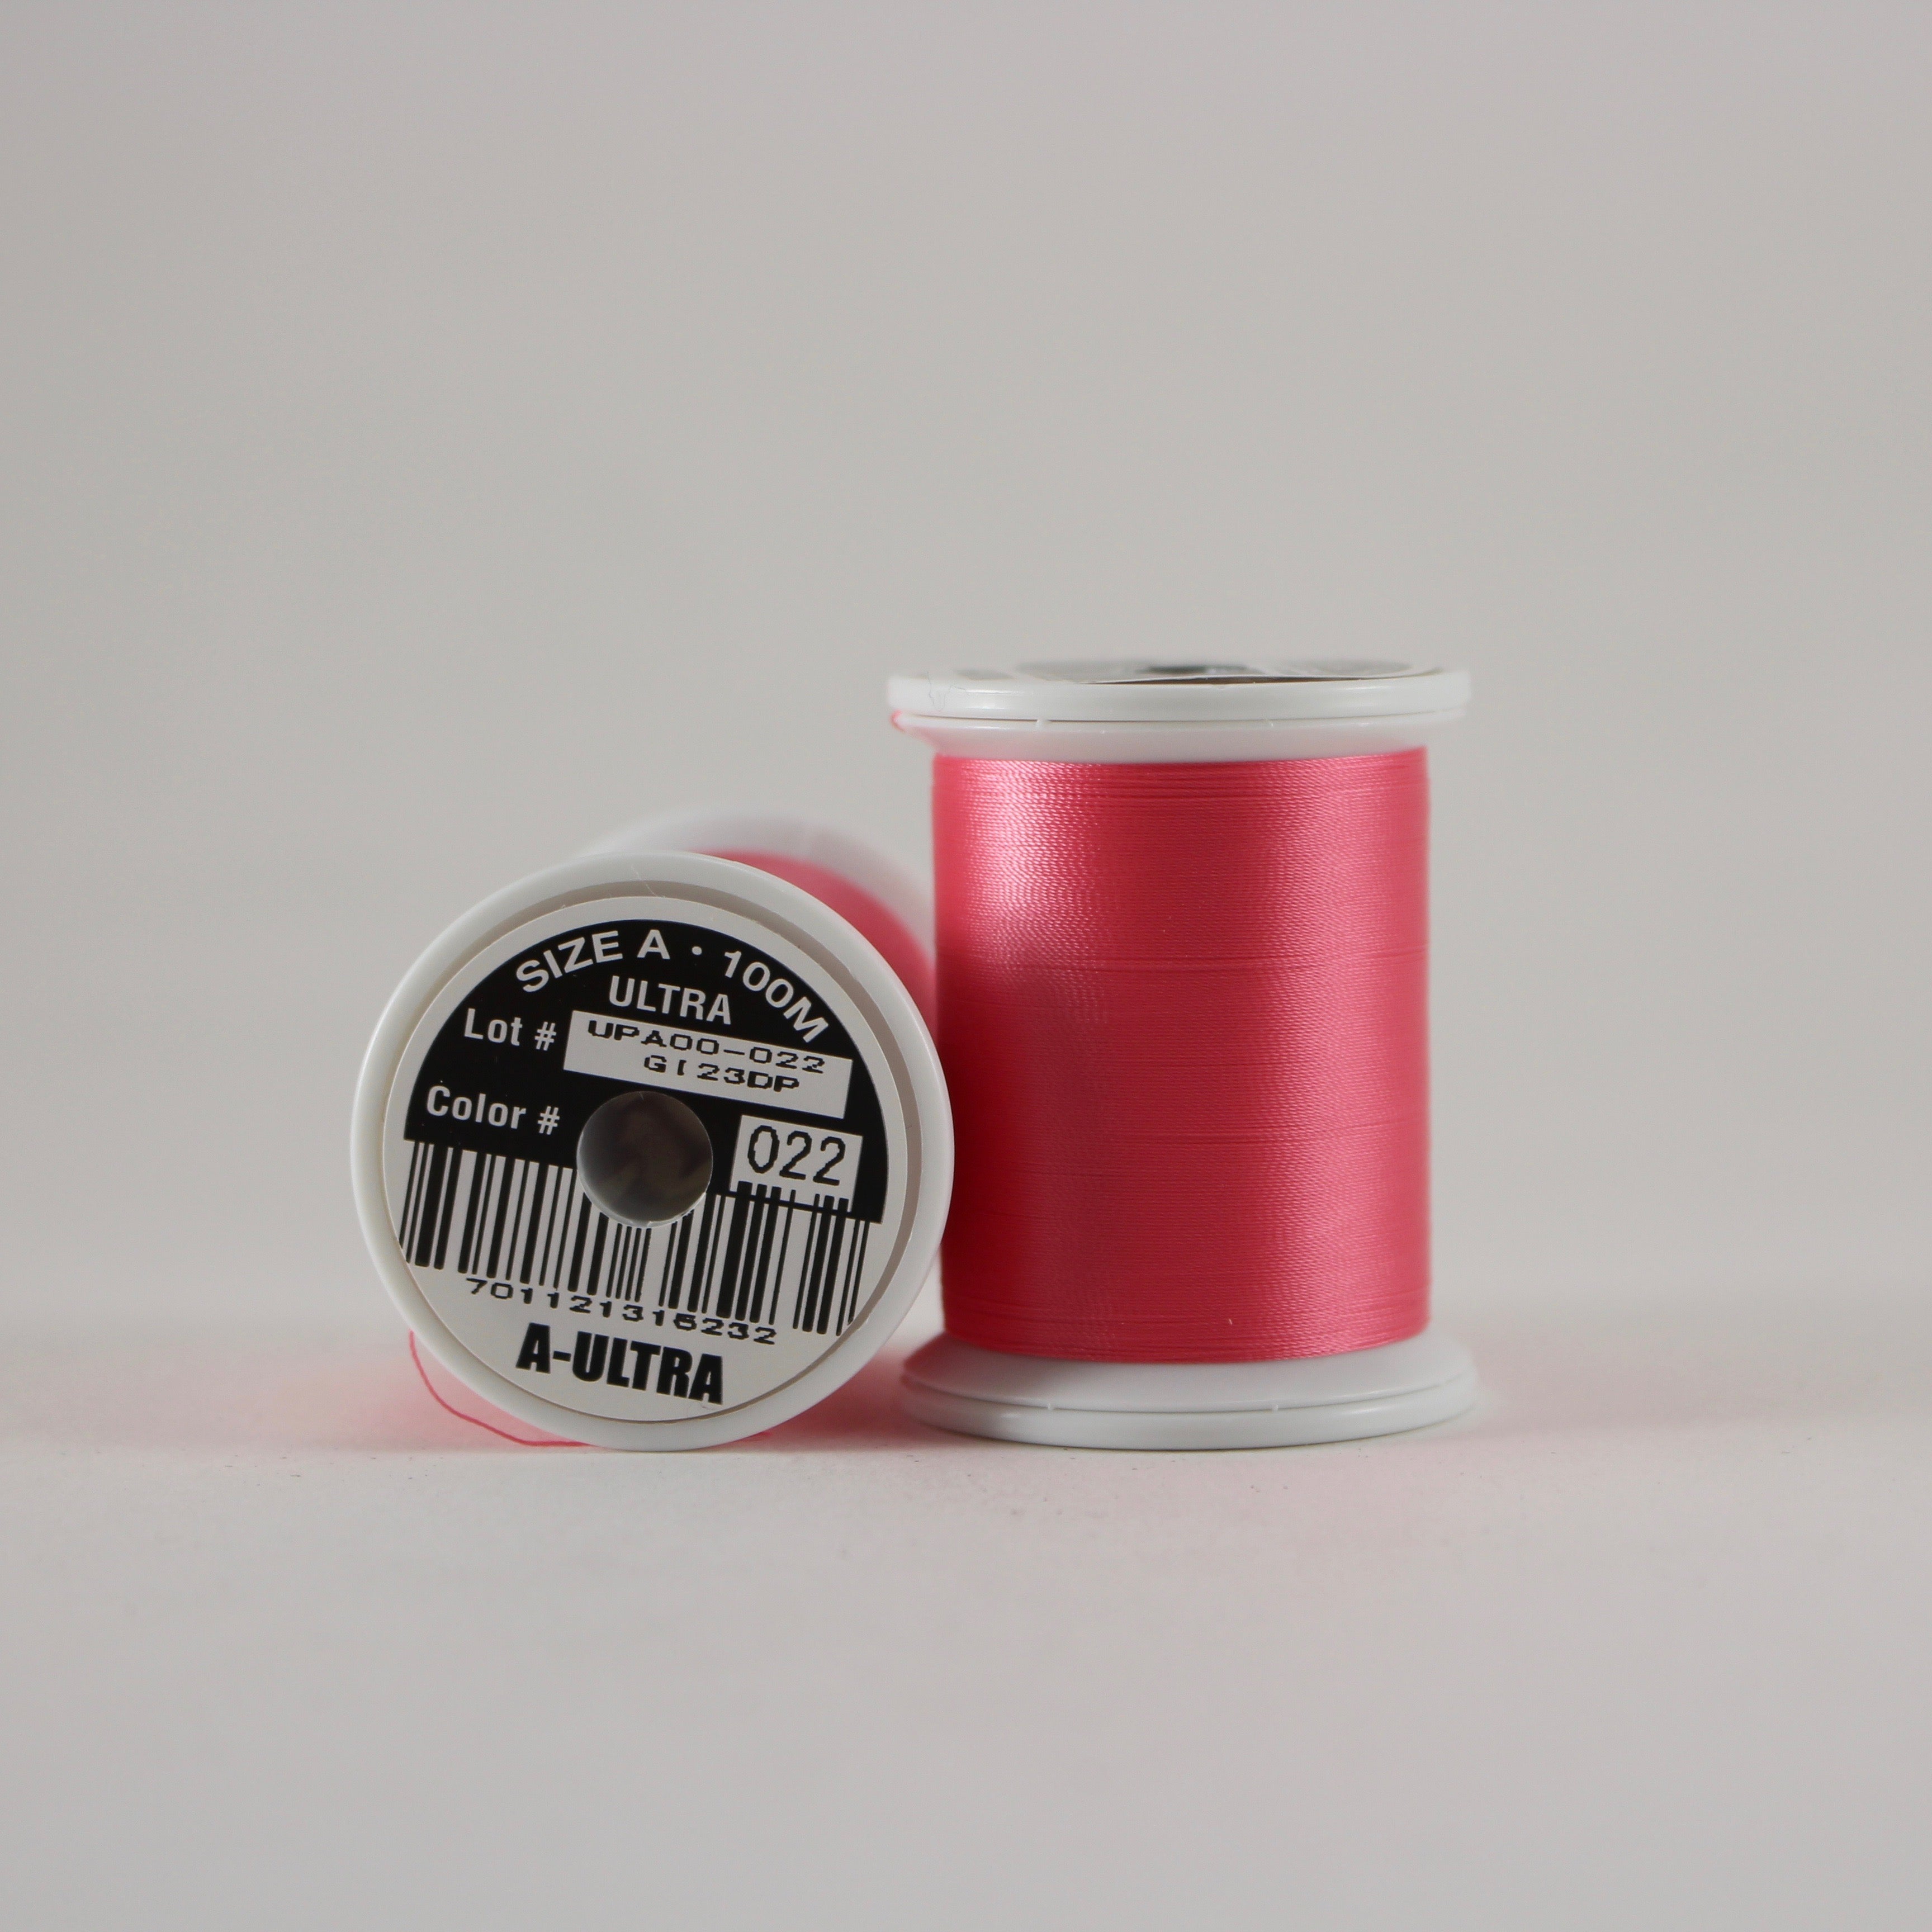 Fuji Ultra Poly rod wrapping thread in Hot Pink #022 (Size A 100m spoo –  Proof Fly Fishing